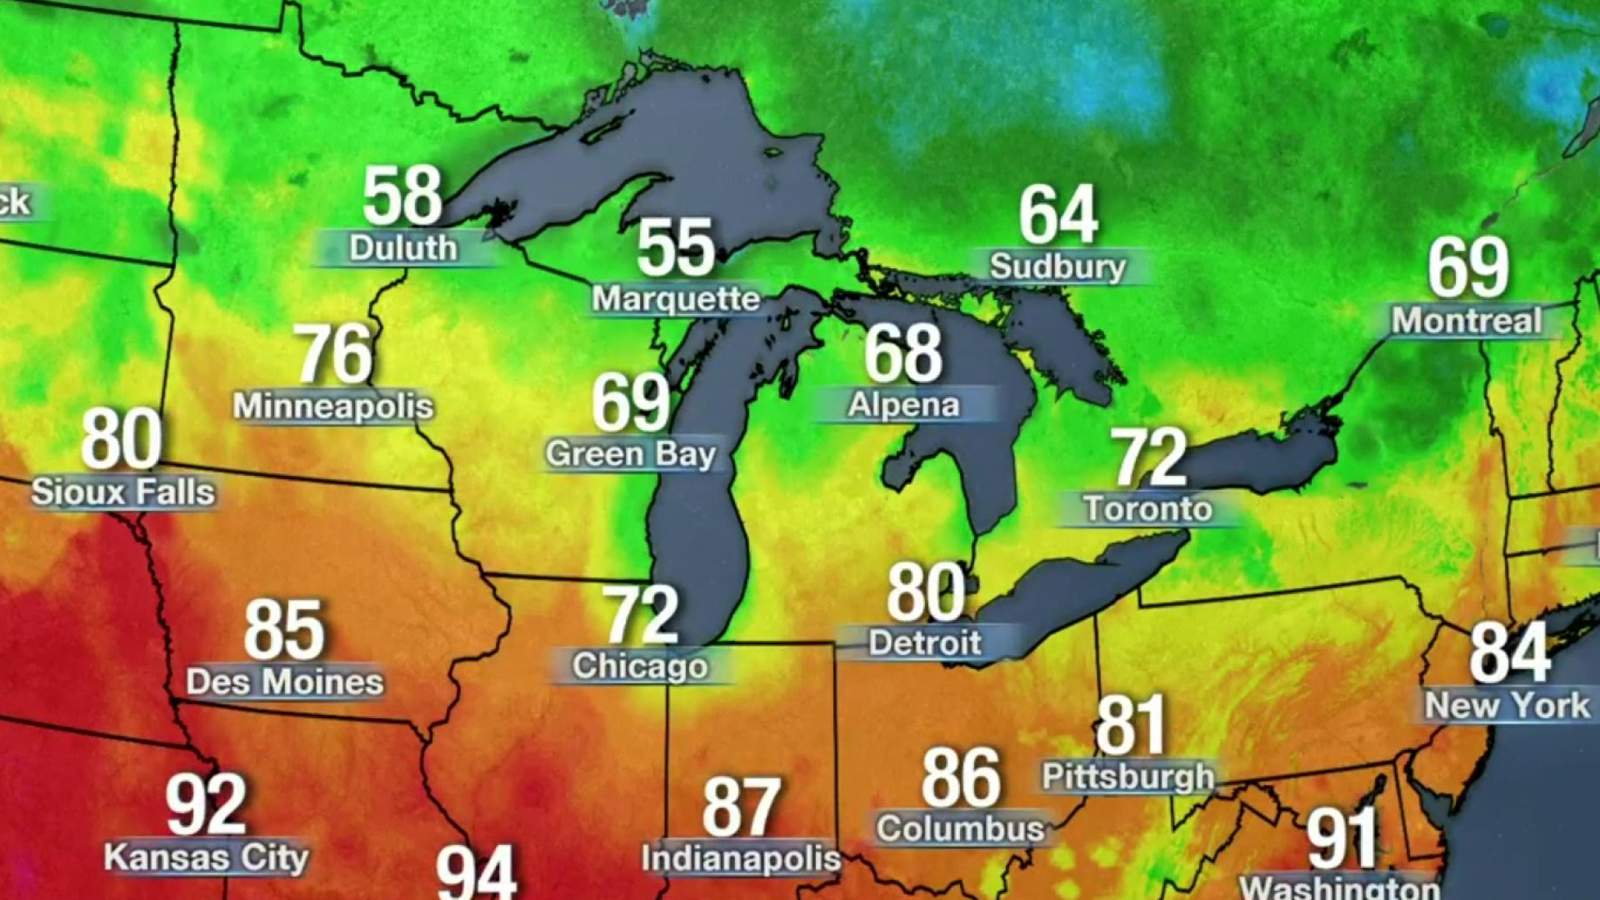 Metro Detroit weather: Clear, cool, comfortable Saturday night